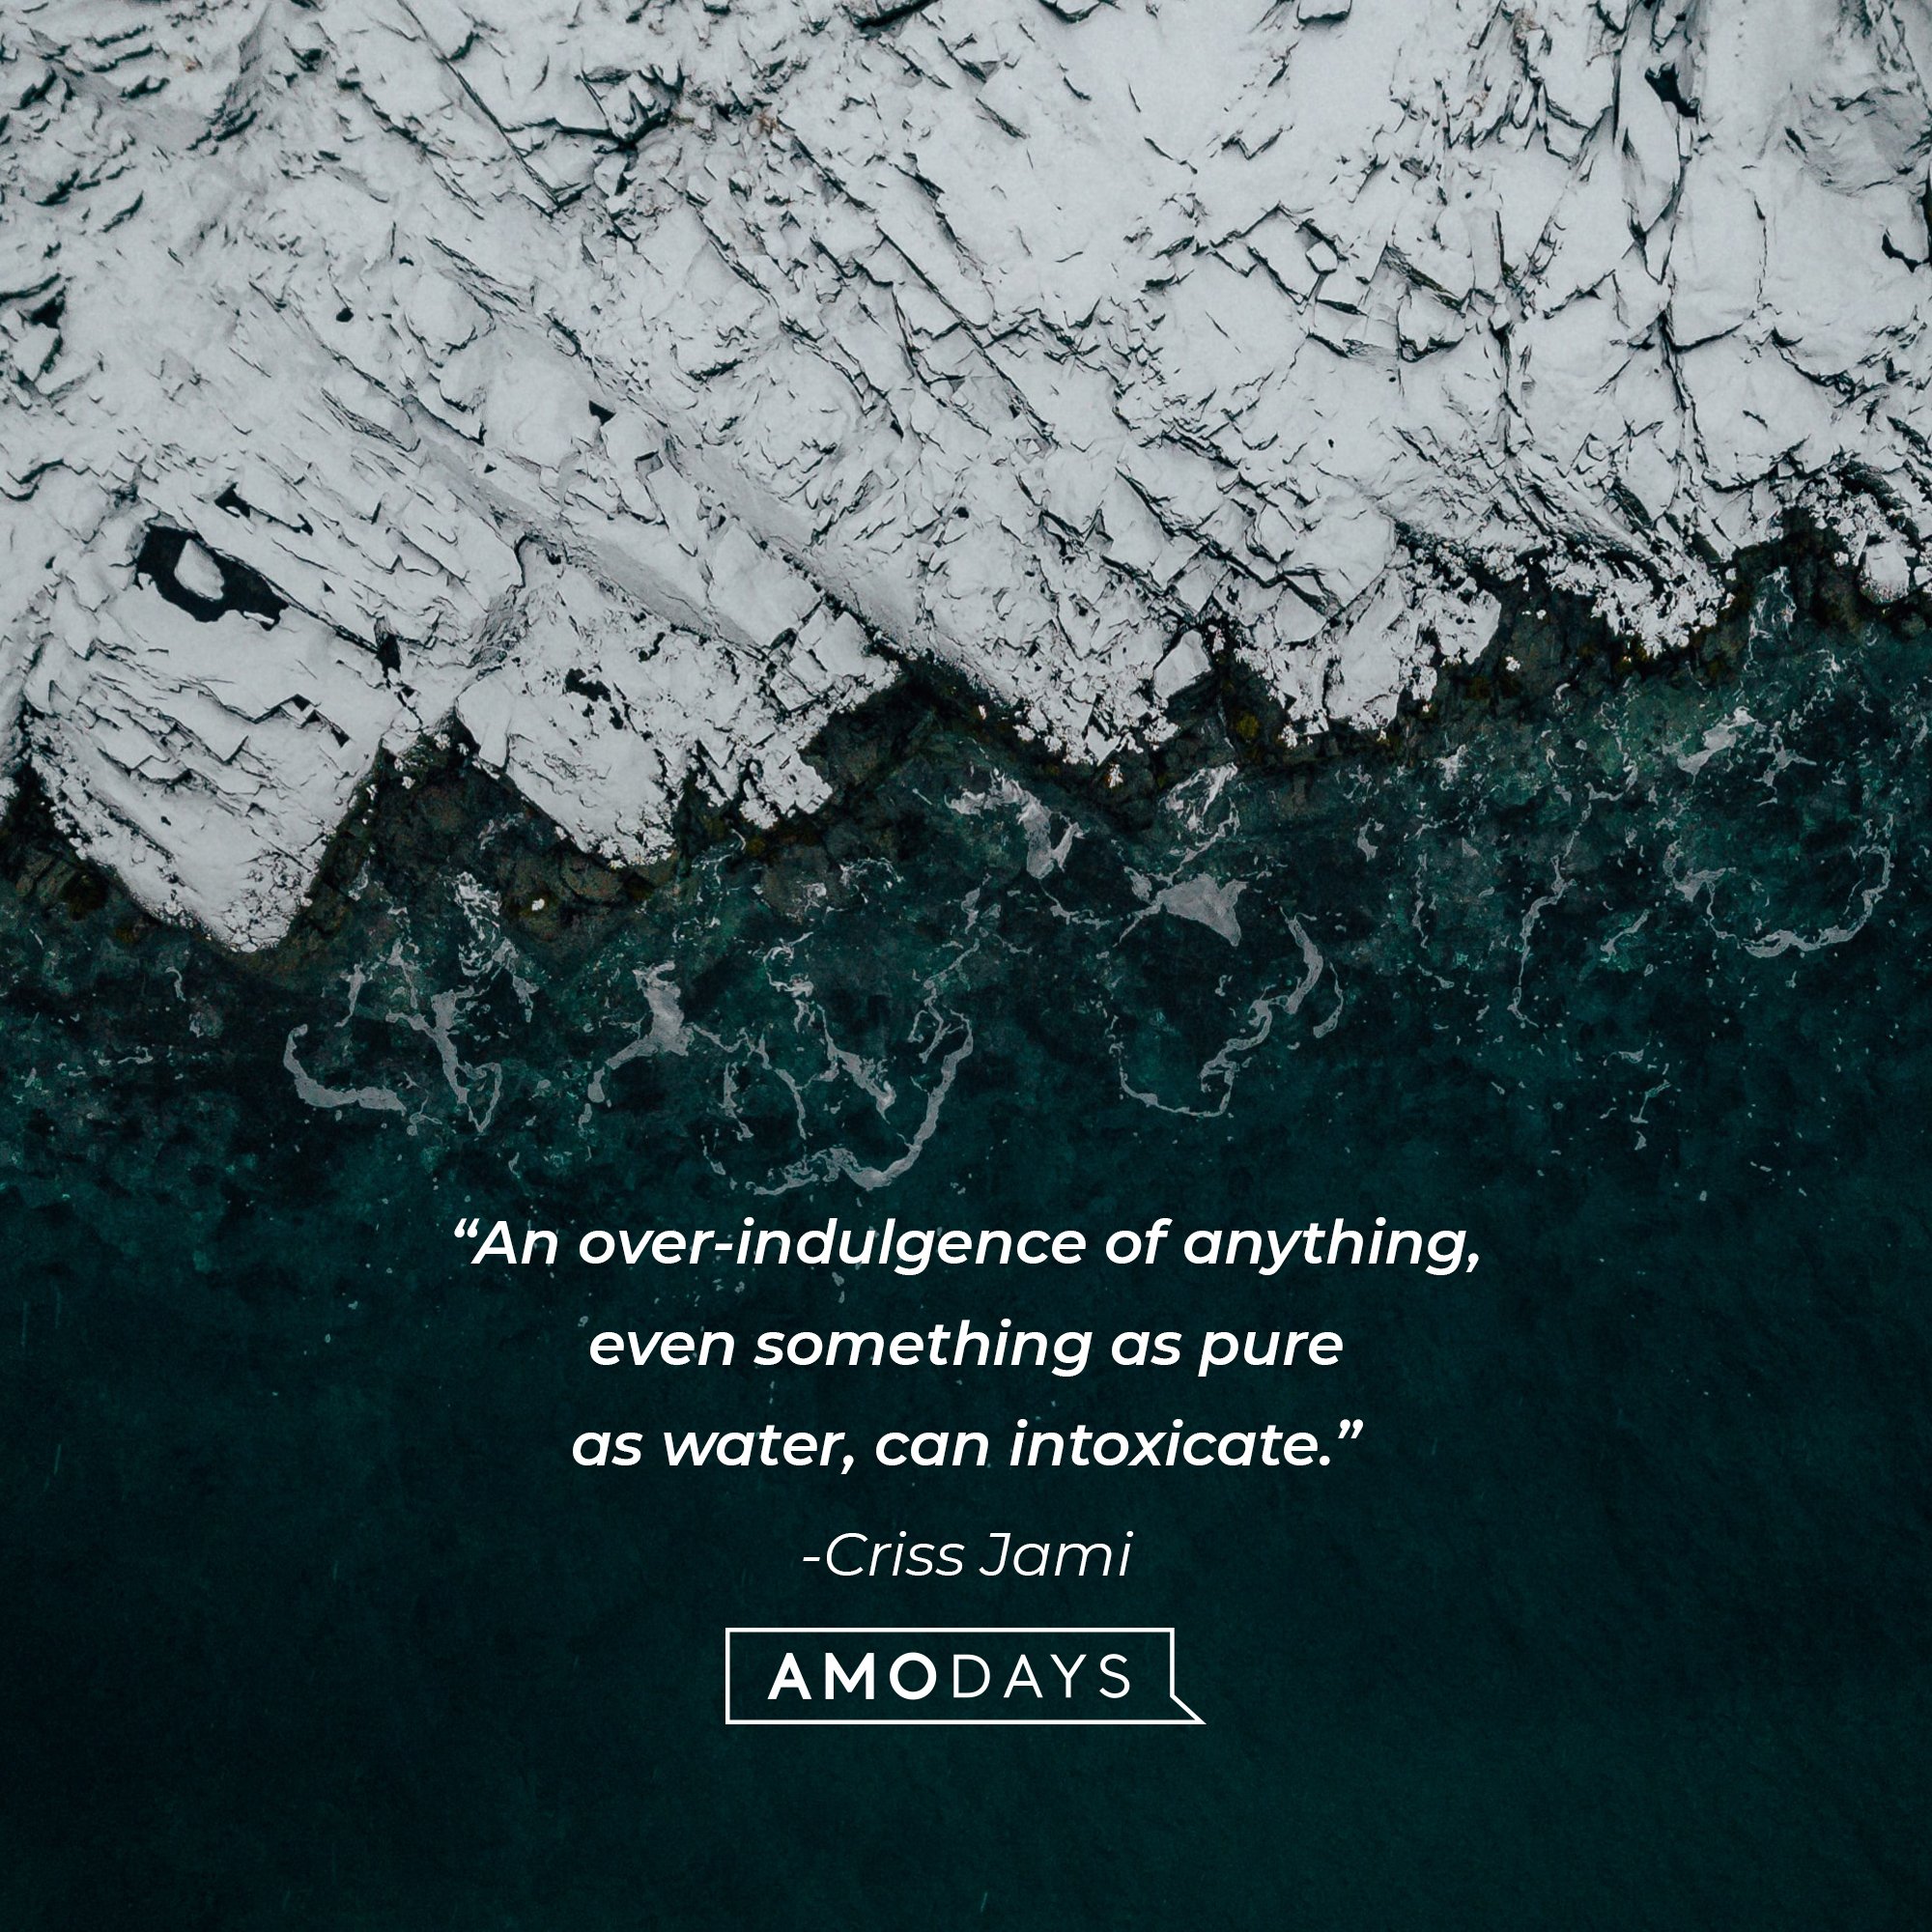 Criss Jami’ quote: “An over-indulgence of anything, even something as pure as water, can intoxicate.” | Image: AmoDays